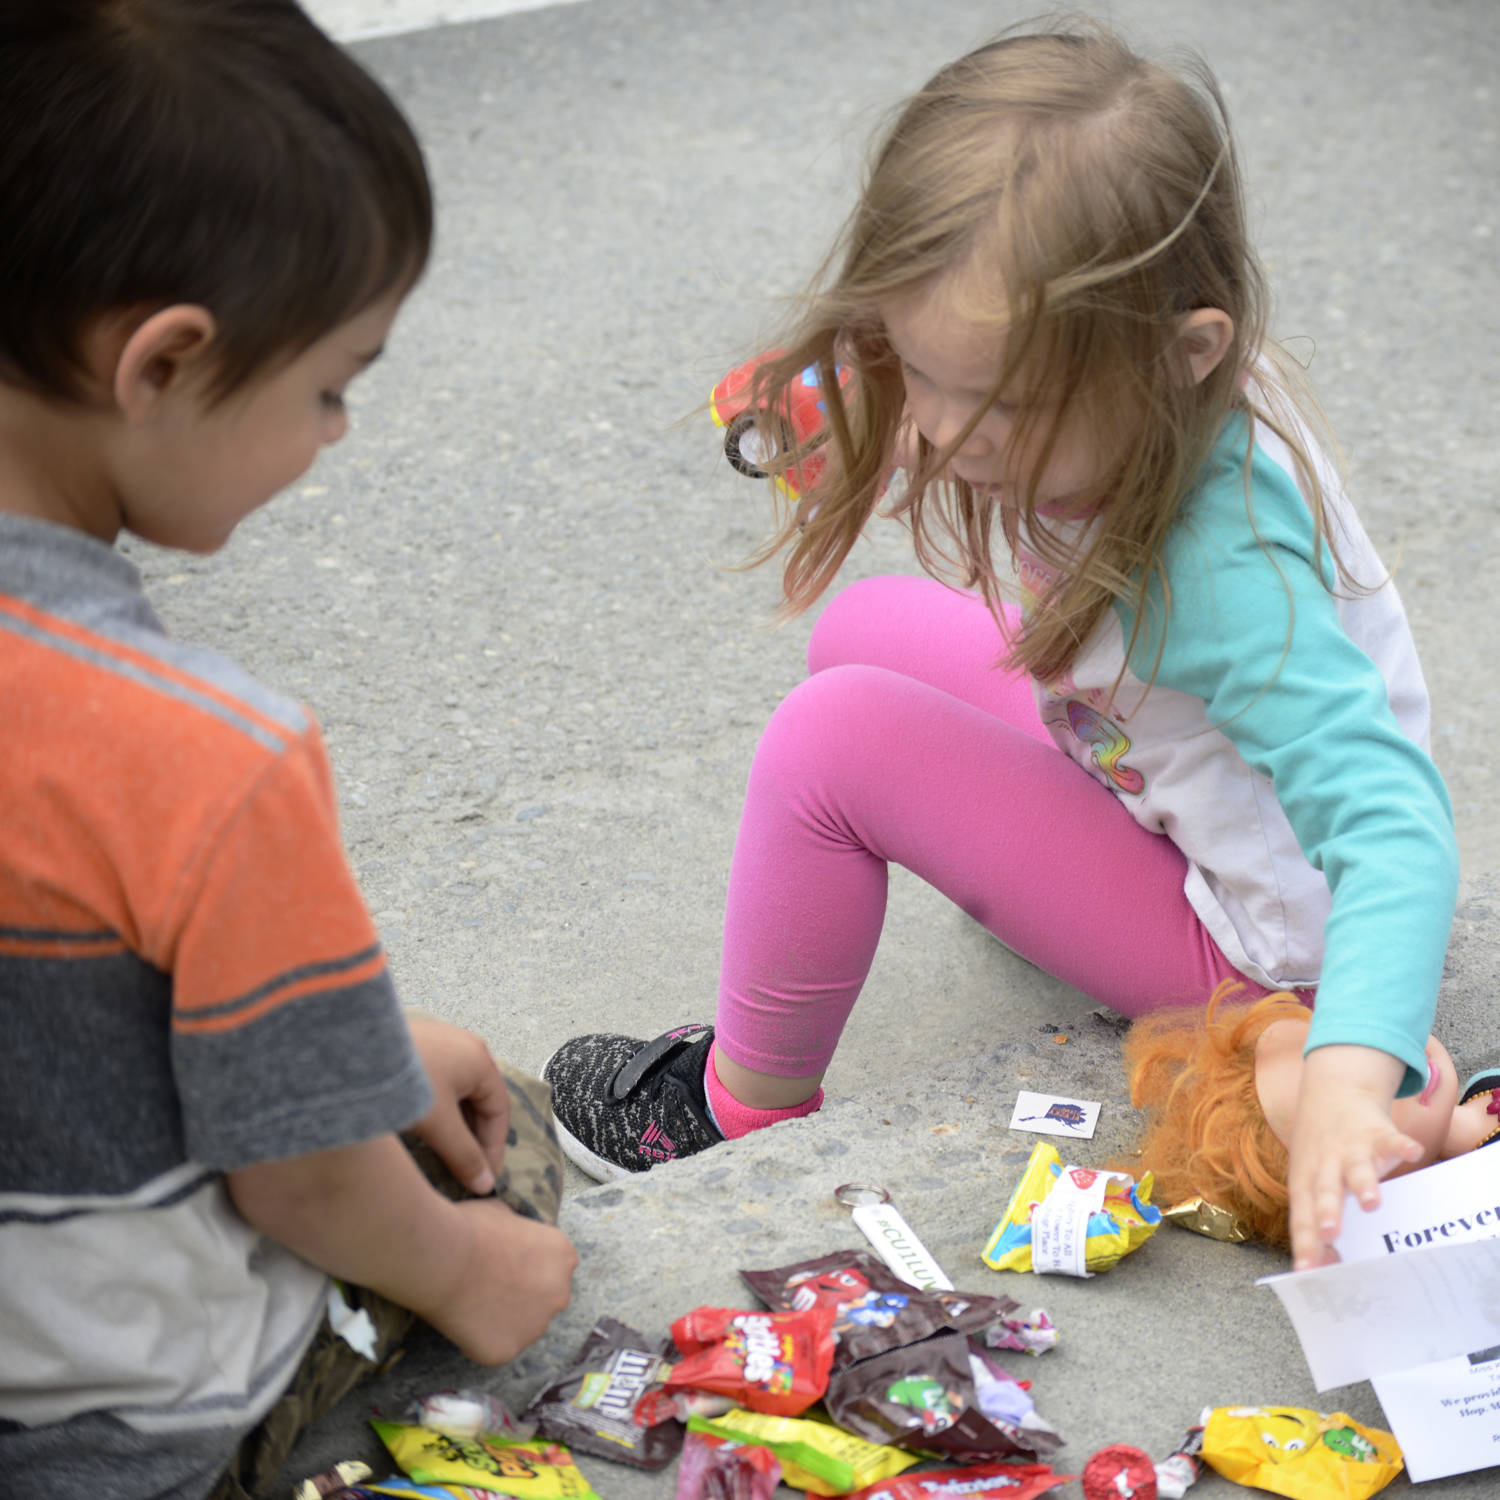 Ian Garay, 7, (left) and Stephanie Daigle, 3, (right), take stock of their candy stash collected from the Progress Days parade on Marydale Avenue on Saturday, July 28, 2018 in Soldotna, Alaska. The parade kicks off the weekend-long event celebrating Soldotna’s history, with a market on Saturday and Sunday in Soldotna Creek Park and a concert Saturday night followed by a free community barbecue Sunday. (Photo by Elizabeth Earl/Peninsula Clarion)